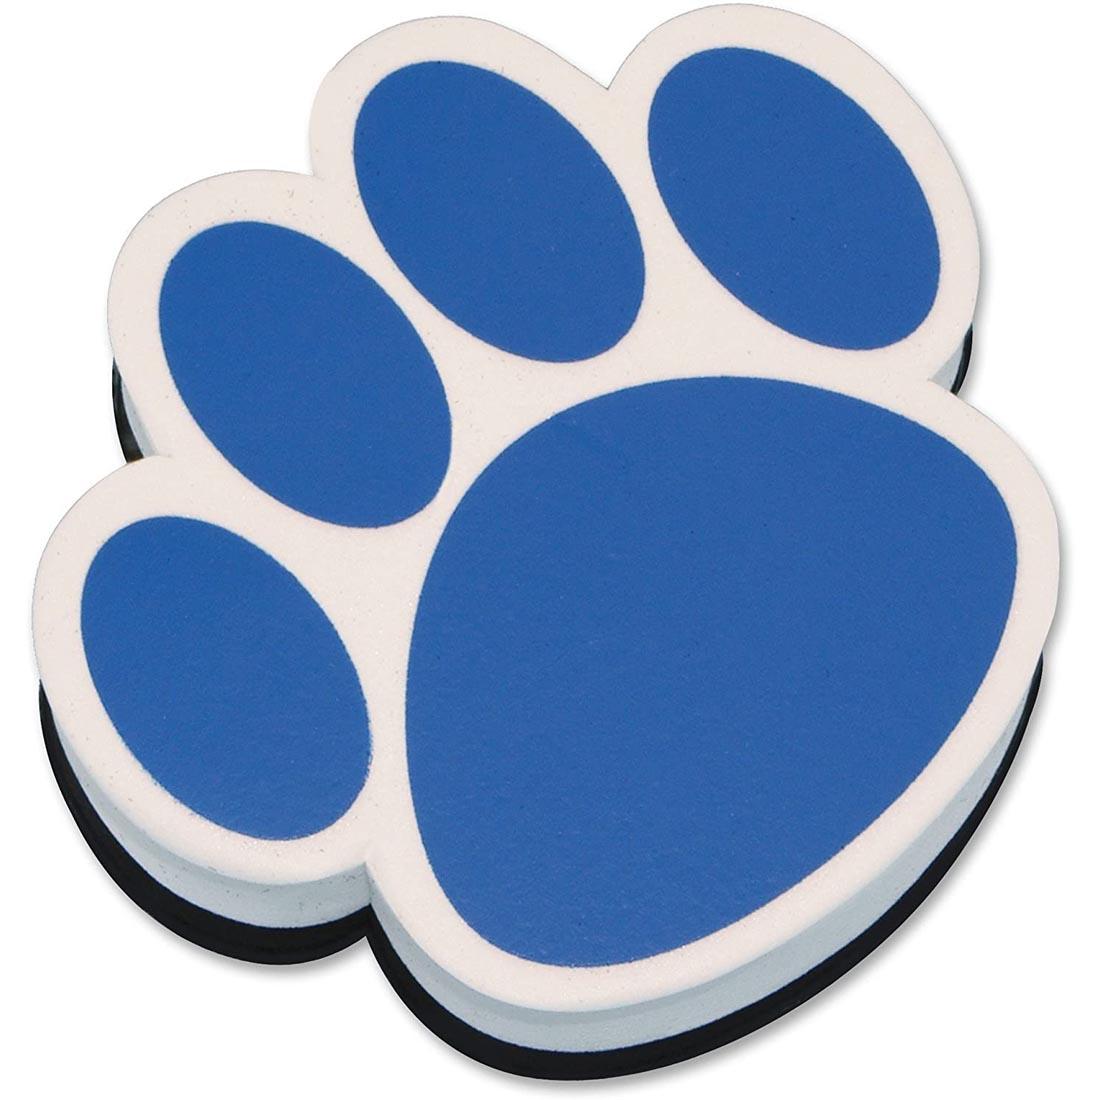 blue and white paw-shaped Magnetic Whiteboard Eraser